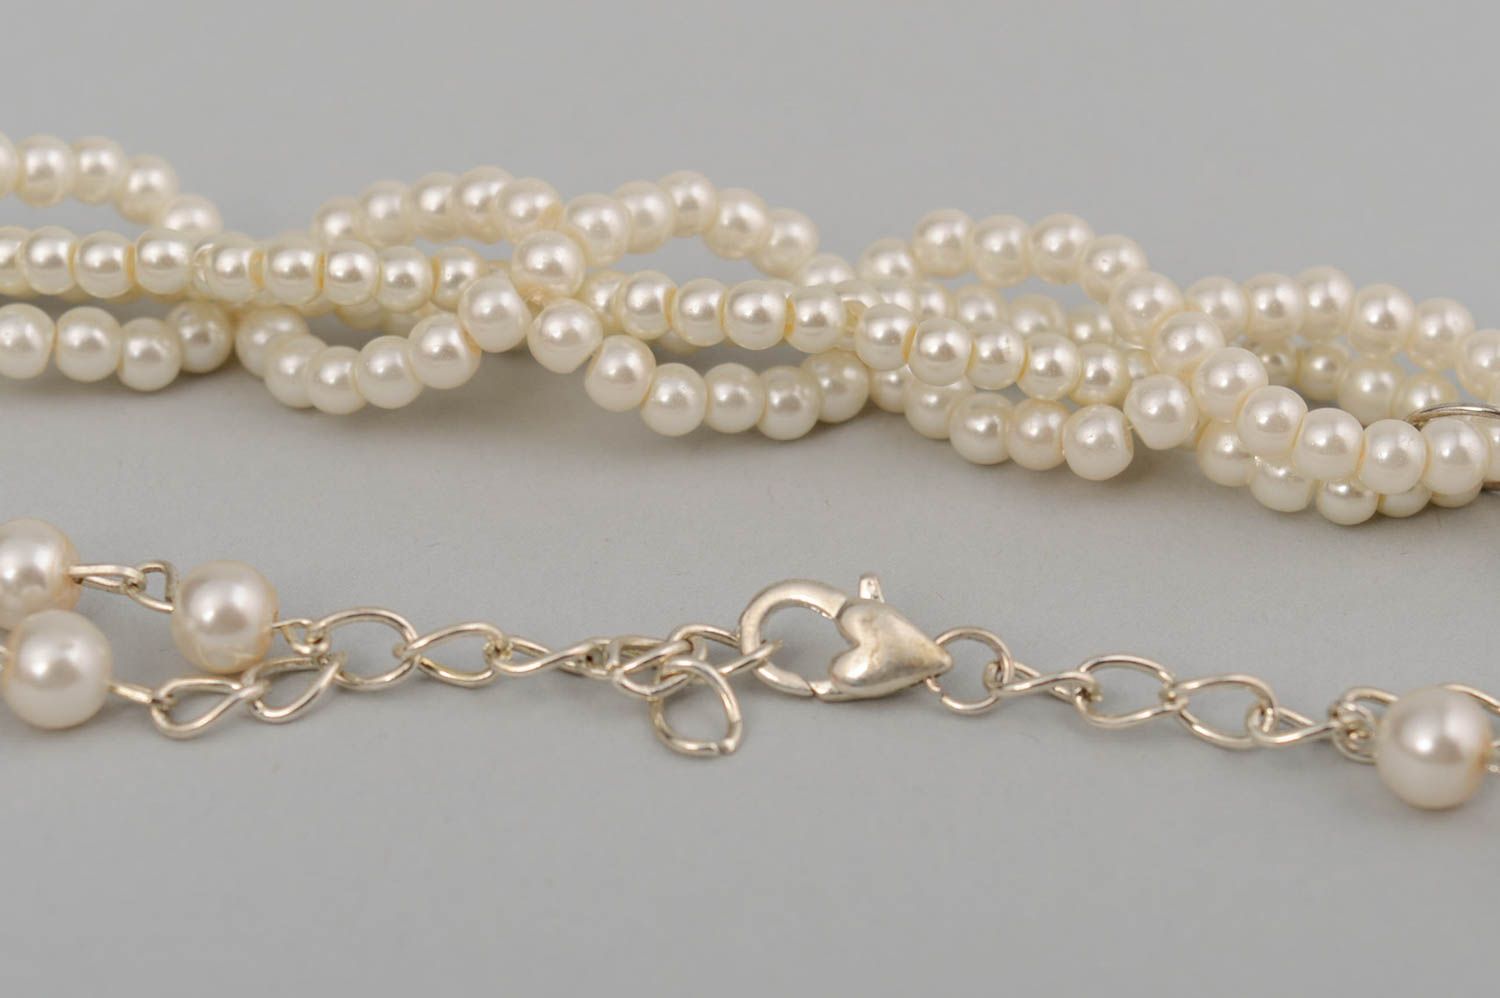 Handmade decorative white ceramic pearl beads necklace long fancy accessory photo 3